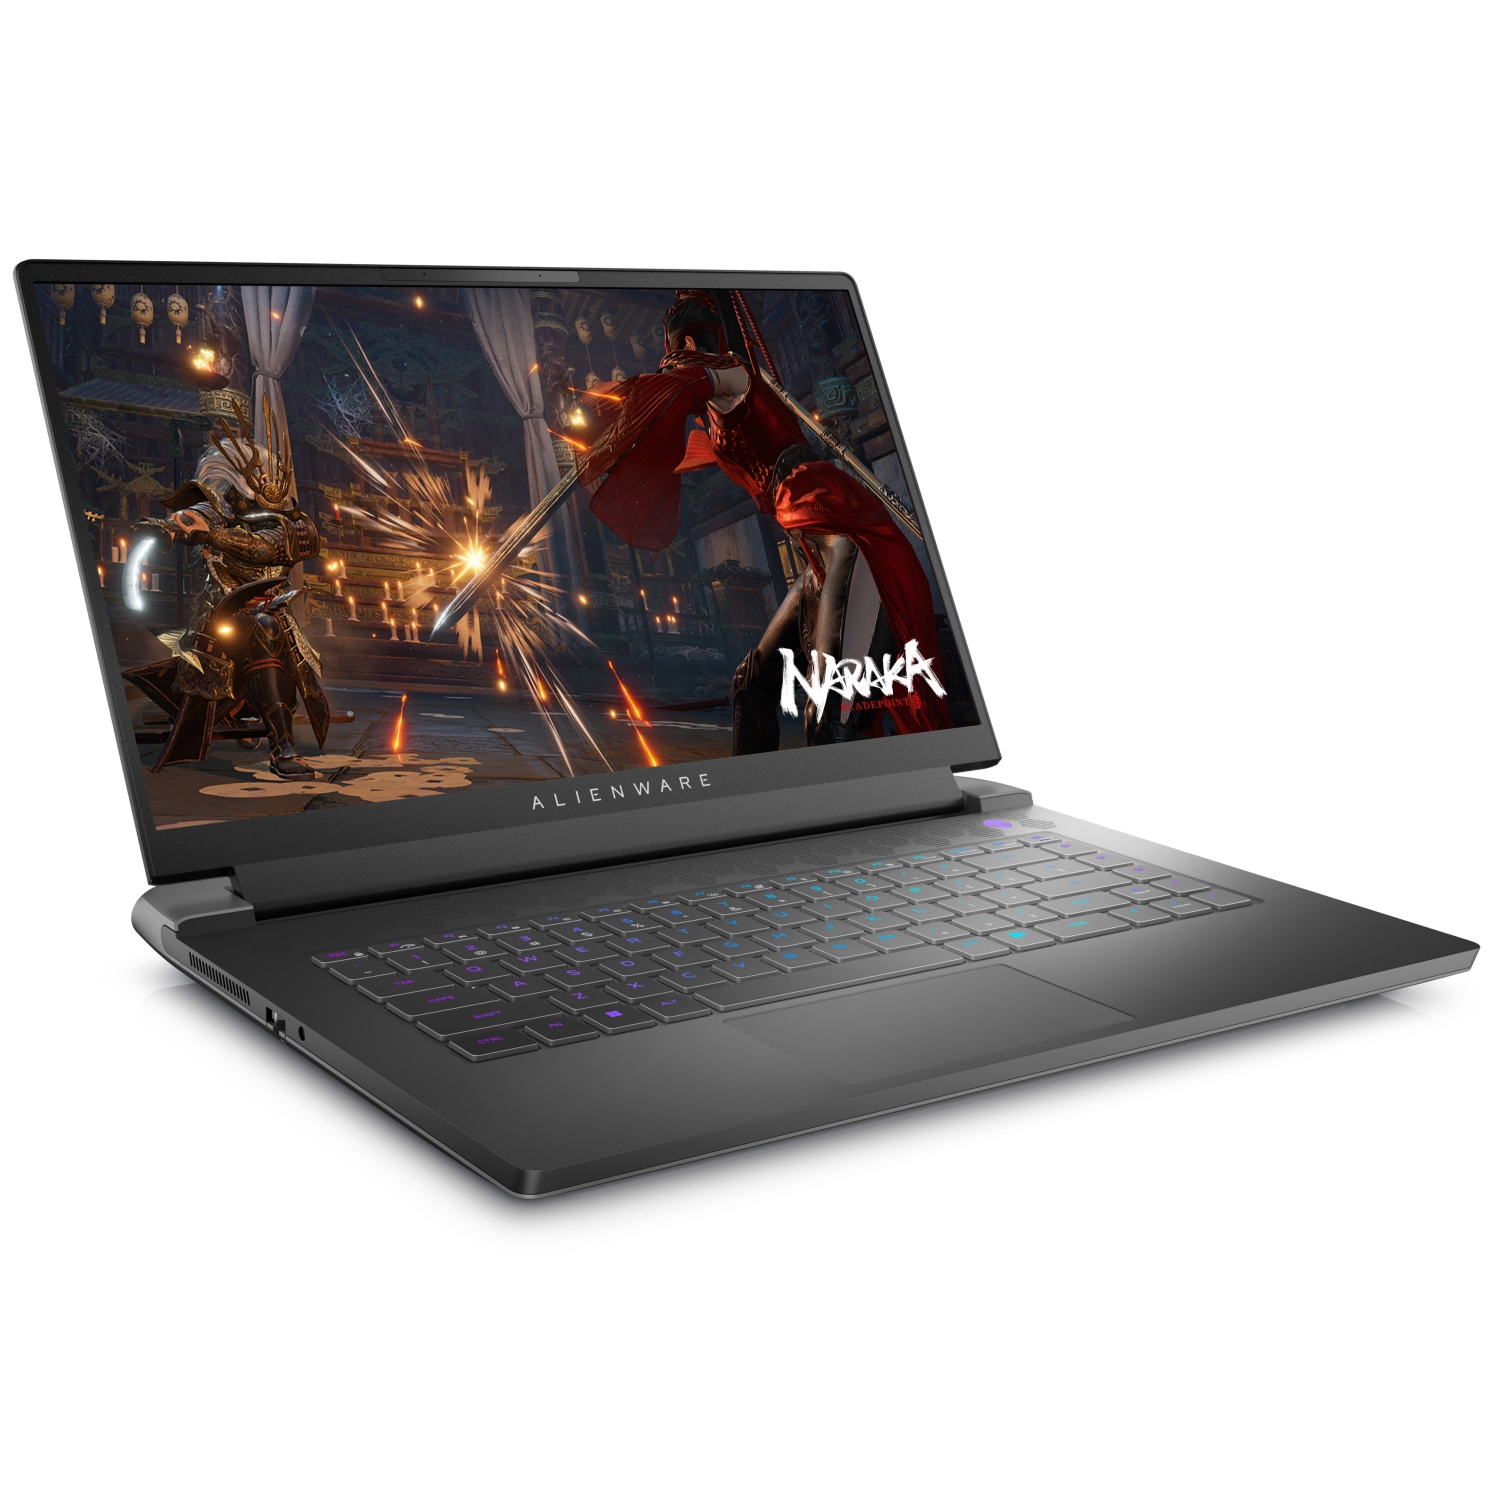 Refurbished (Excellent) – Dell Alienware m15 R7 Gaming Laptop (2022) | 15.6" FHD | Core i9 - 2TB SSD - 32GB RAM - RTX 3080 | 14 Cores @ 5 GHz - 12th Gen CPU - 8GB GDDR6X